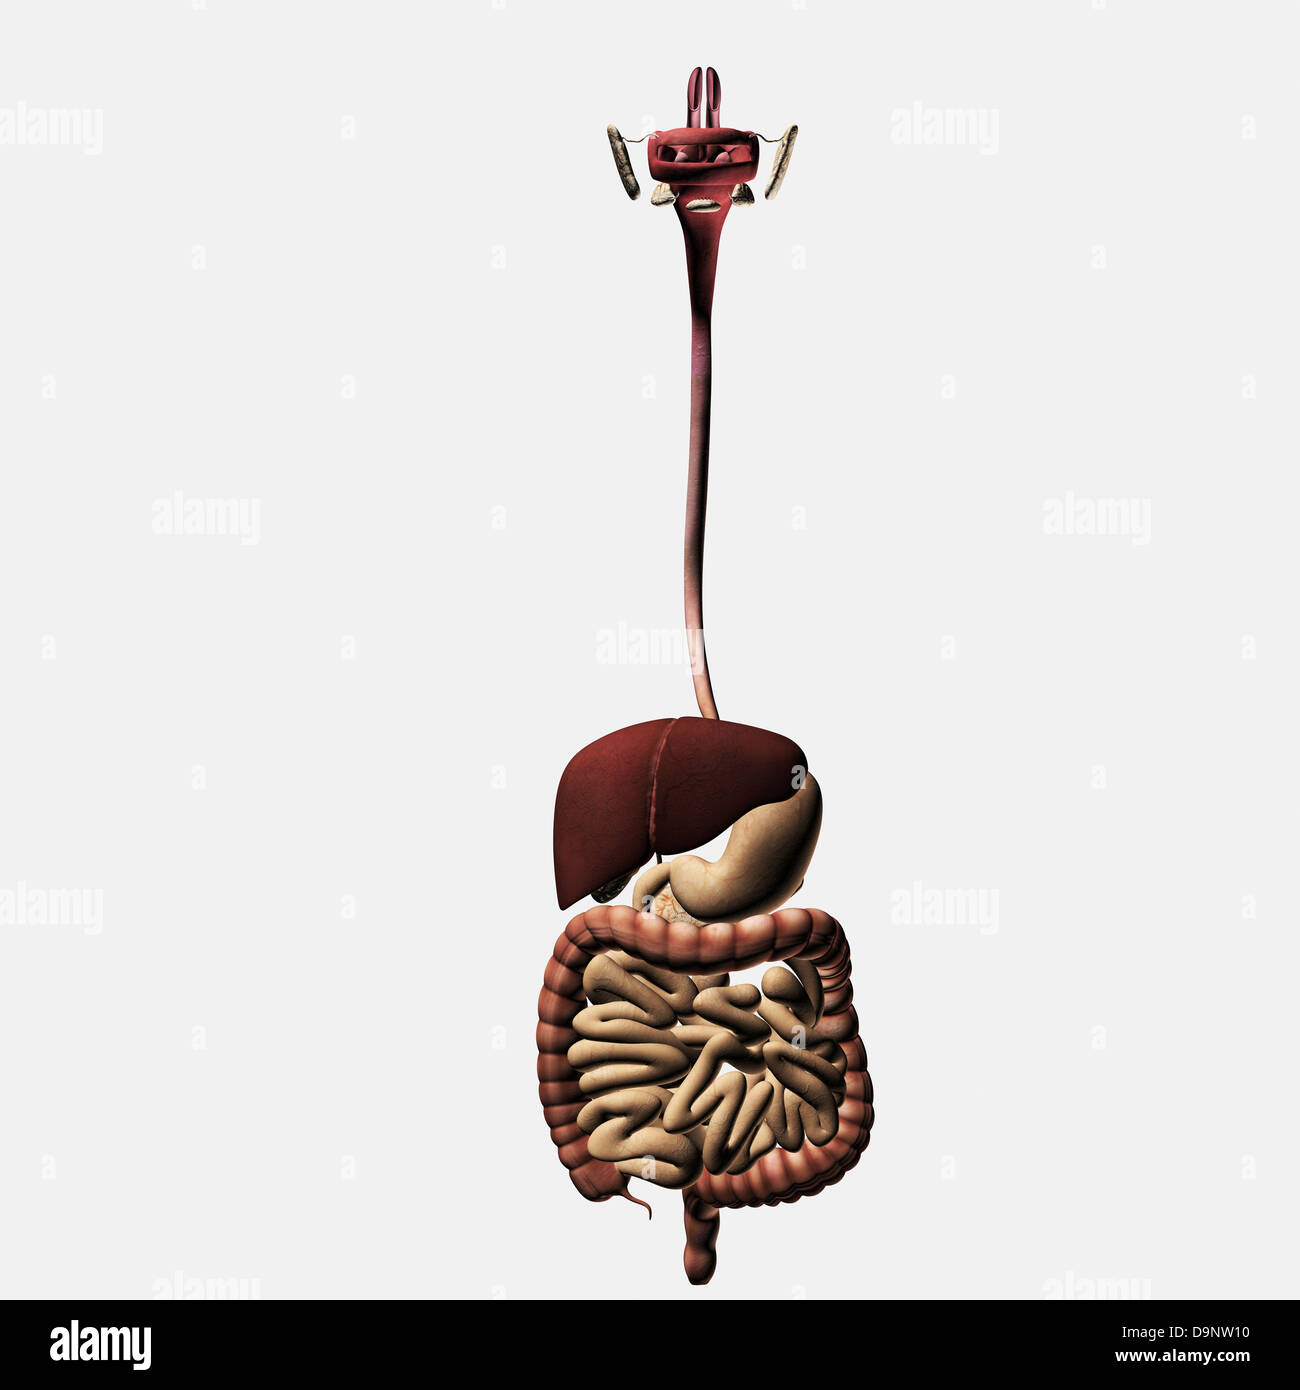 Medical illustration of the human digestive system; oral cavity, esophagus, liver, stomach, large intestine, small intestine. Stock Photo